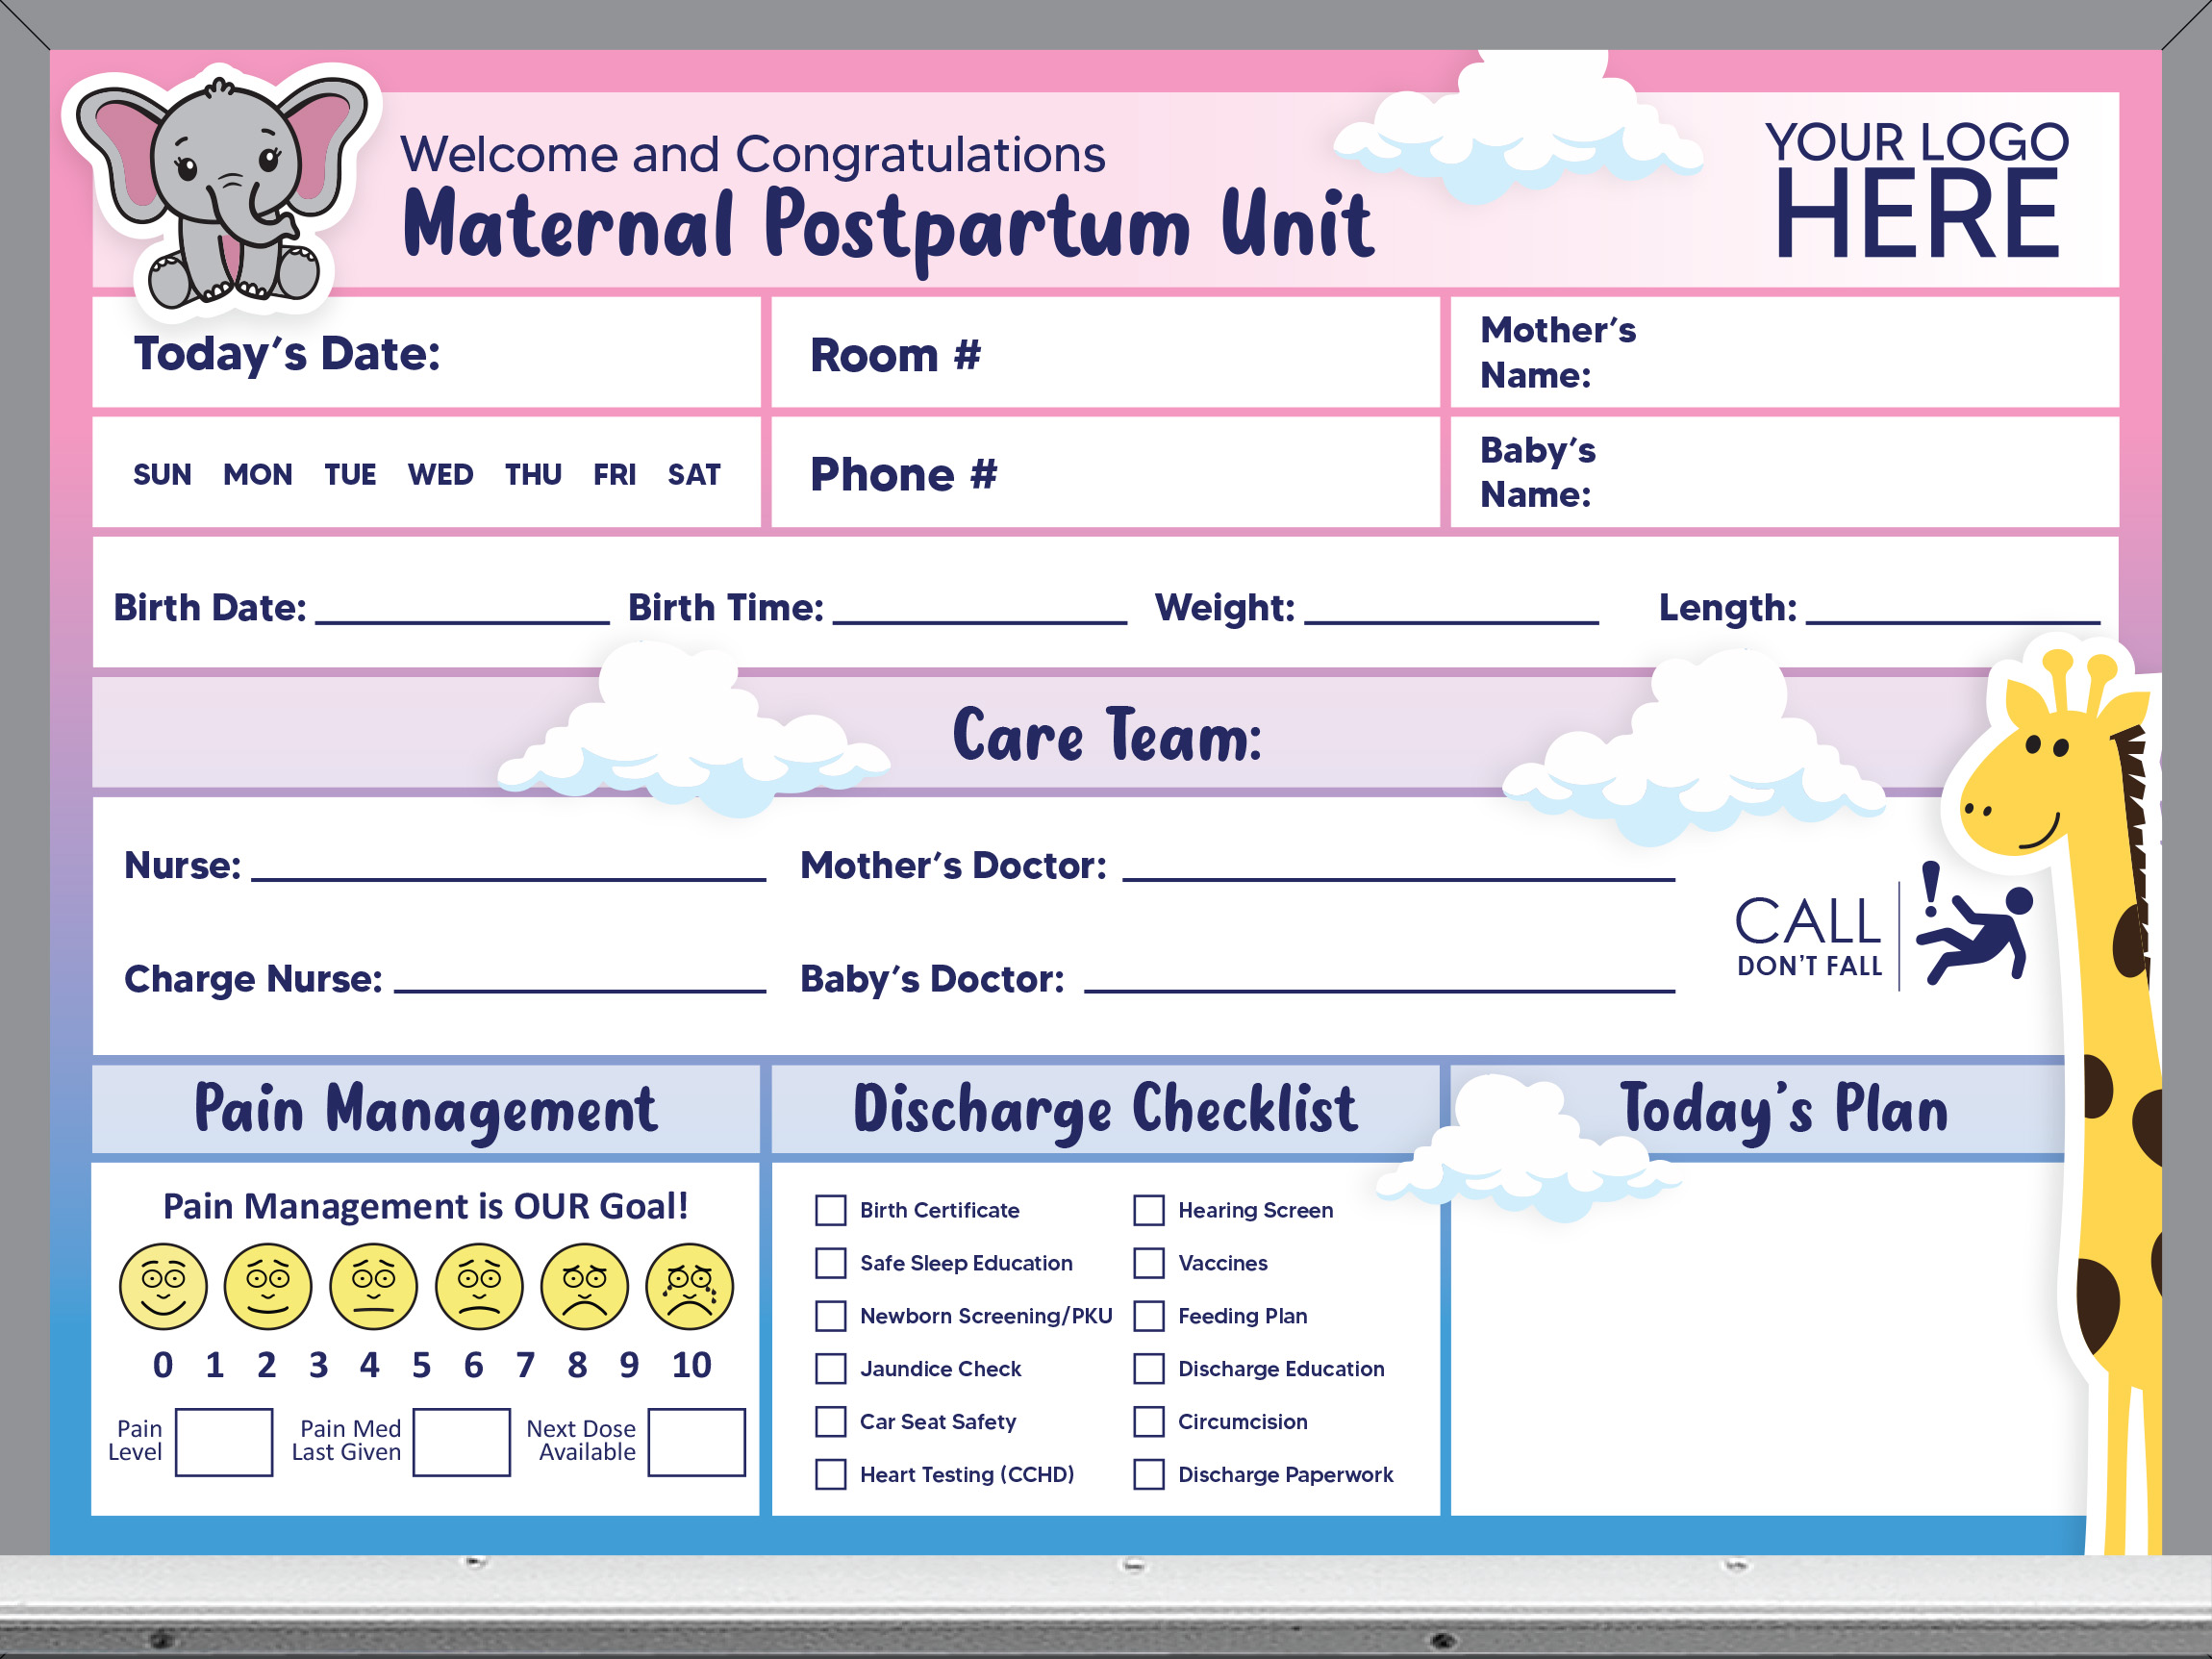 18x24 maternity room whiteboard - pre-printed, add your logo